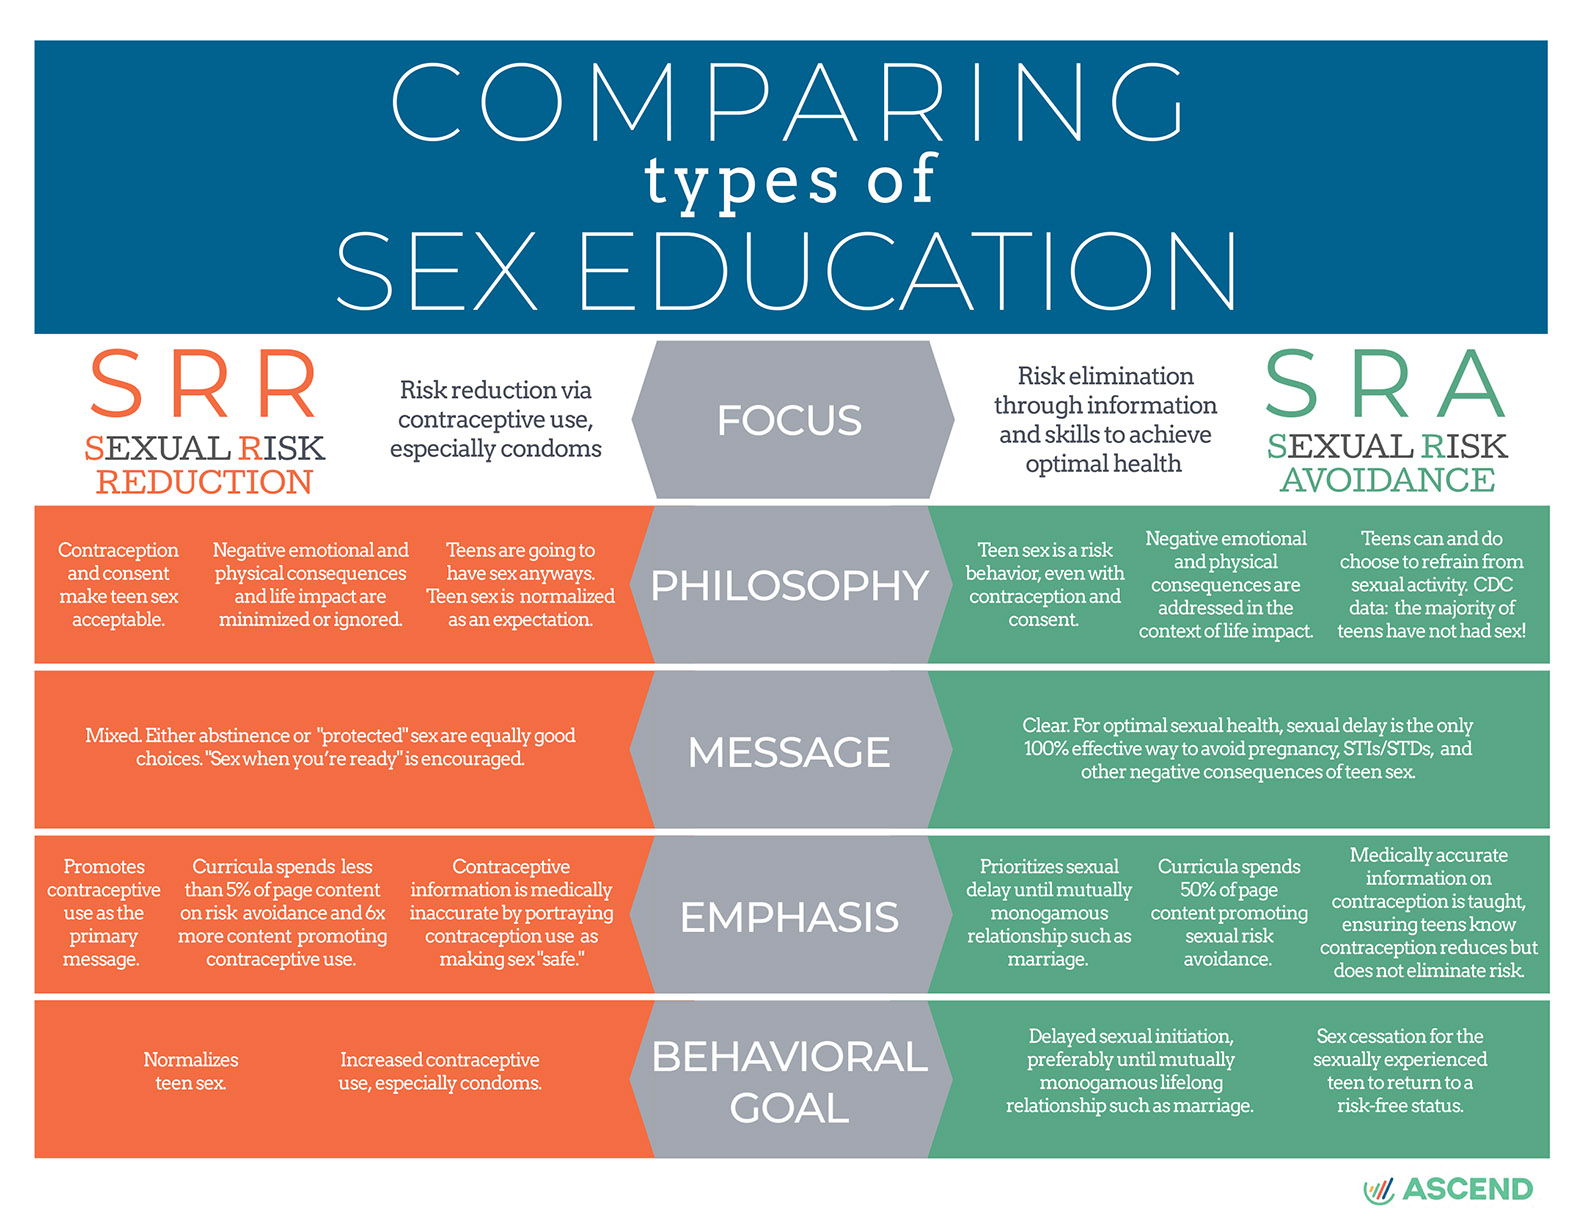 The Important Differences between "Sexual Risk REDUCTION" education and "Sexual Risk AVOIDANCE" education - Free Teens Youth - Changing Minds, Transforming Lives